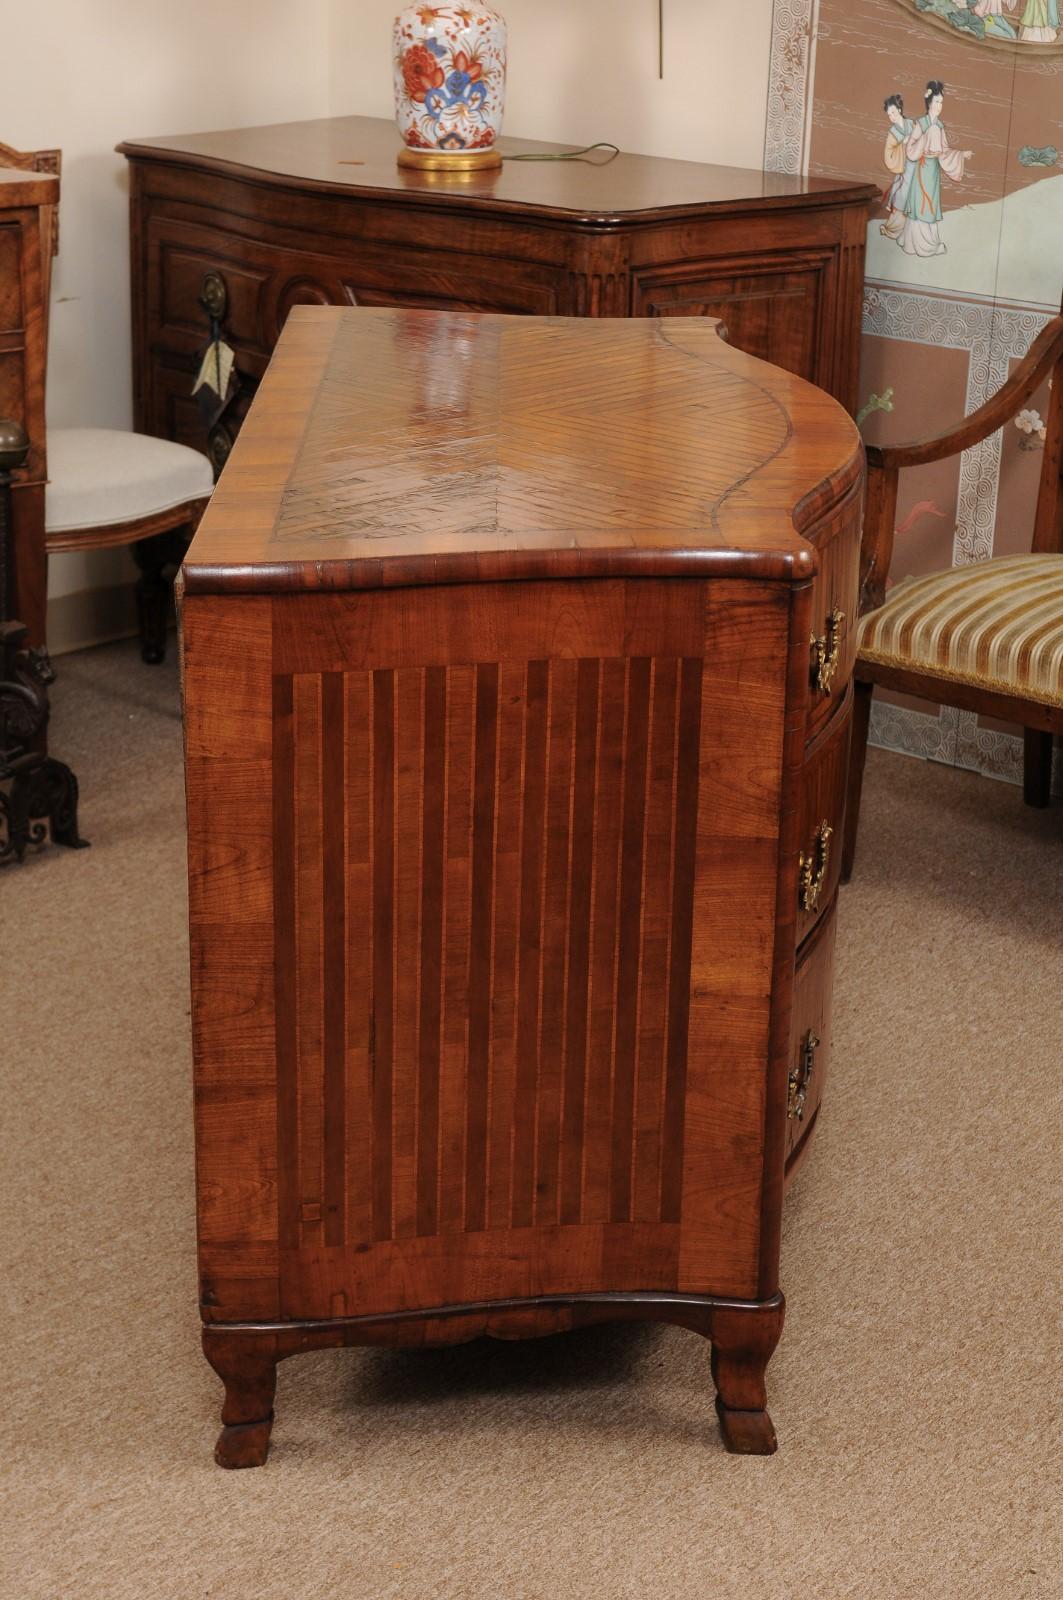  18th Century Continental Parquetry Inlaid Commode with Serpentine Front For Sale 6